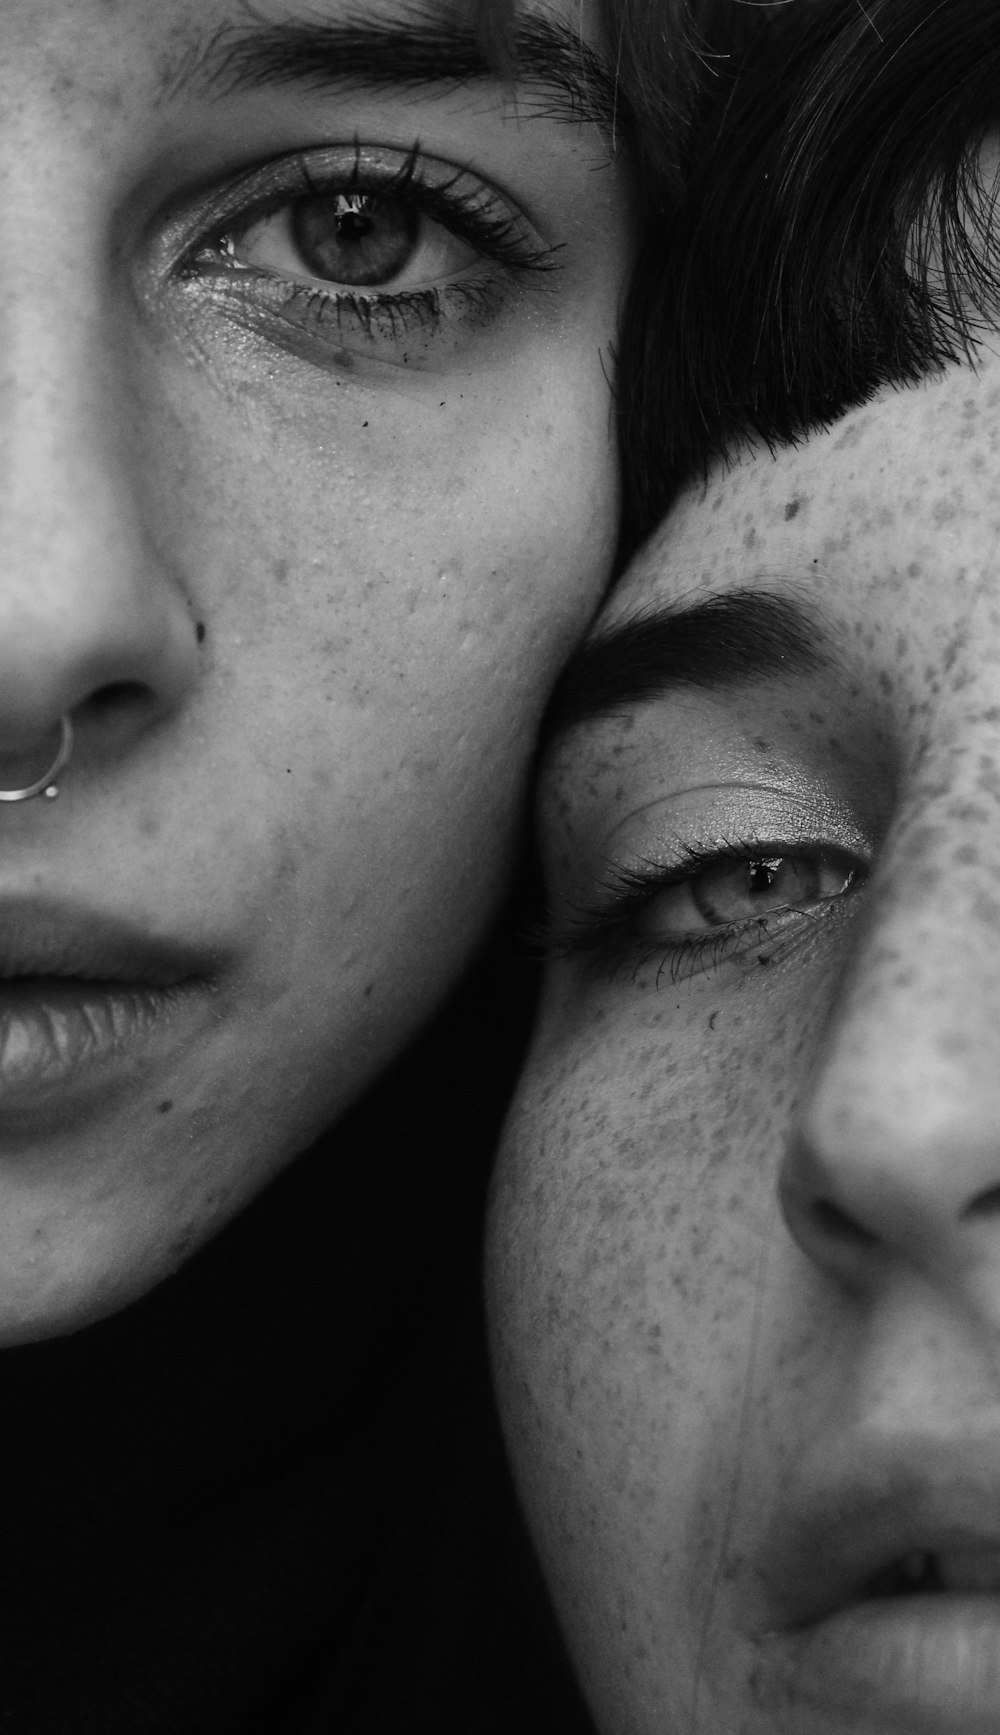 grayscale photography of two faces photo – Free Grey Image on Unsplash